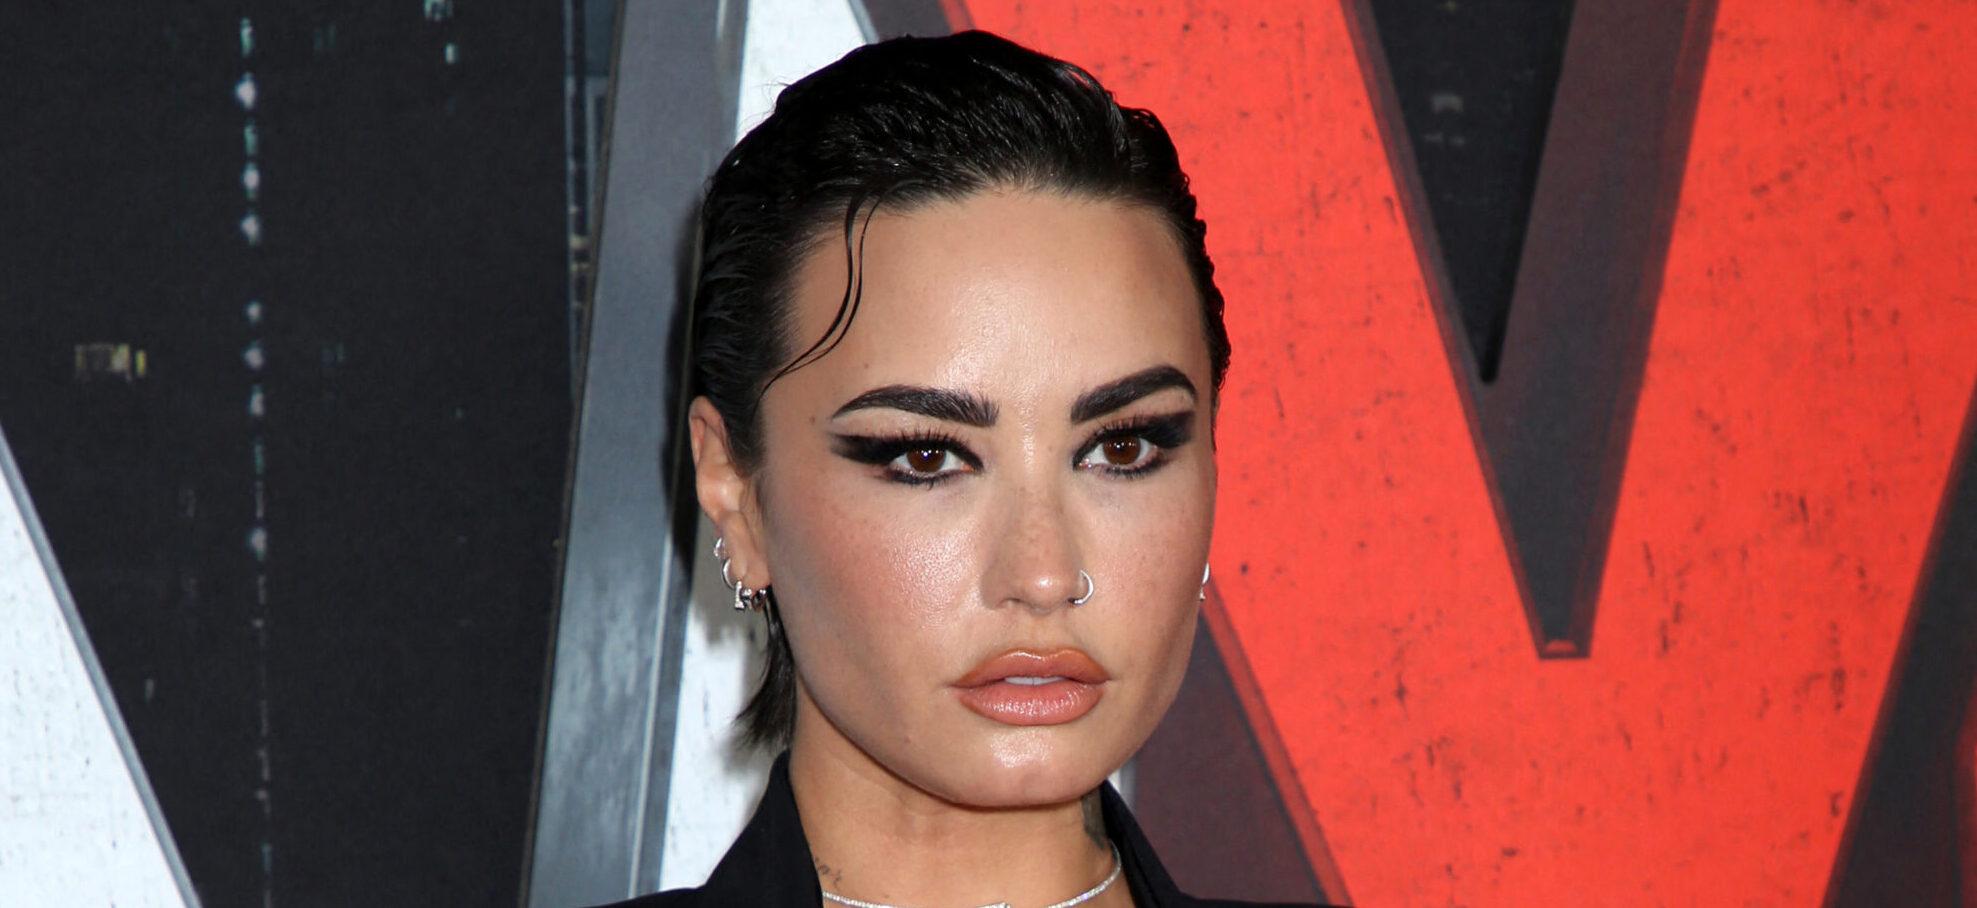 Demi Lovato Reacts After Presence Of UFOs Is Confirmed During Congress Hearing